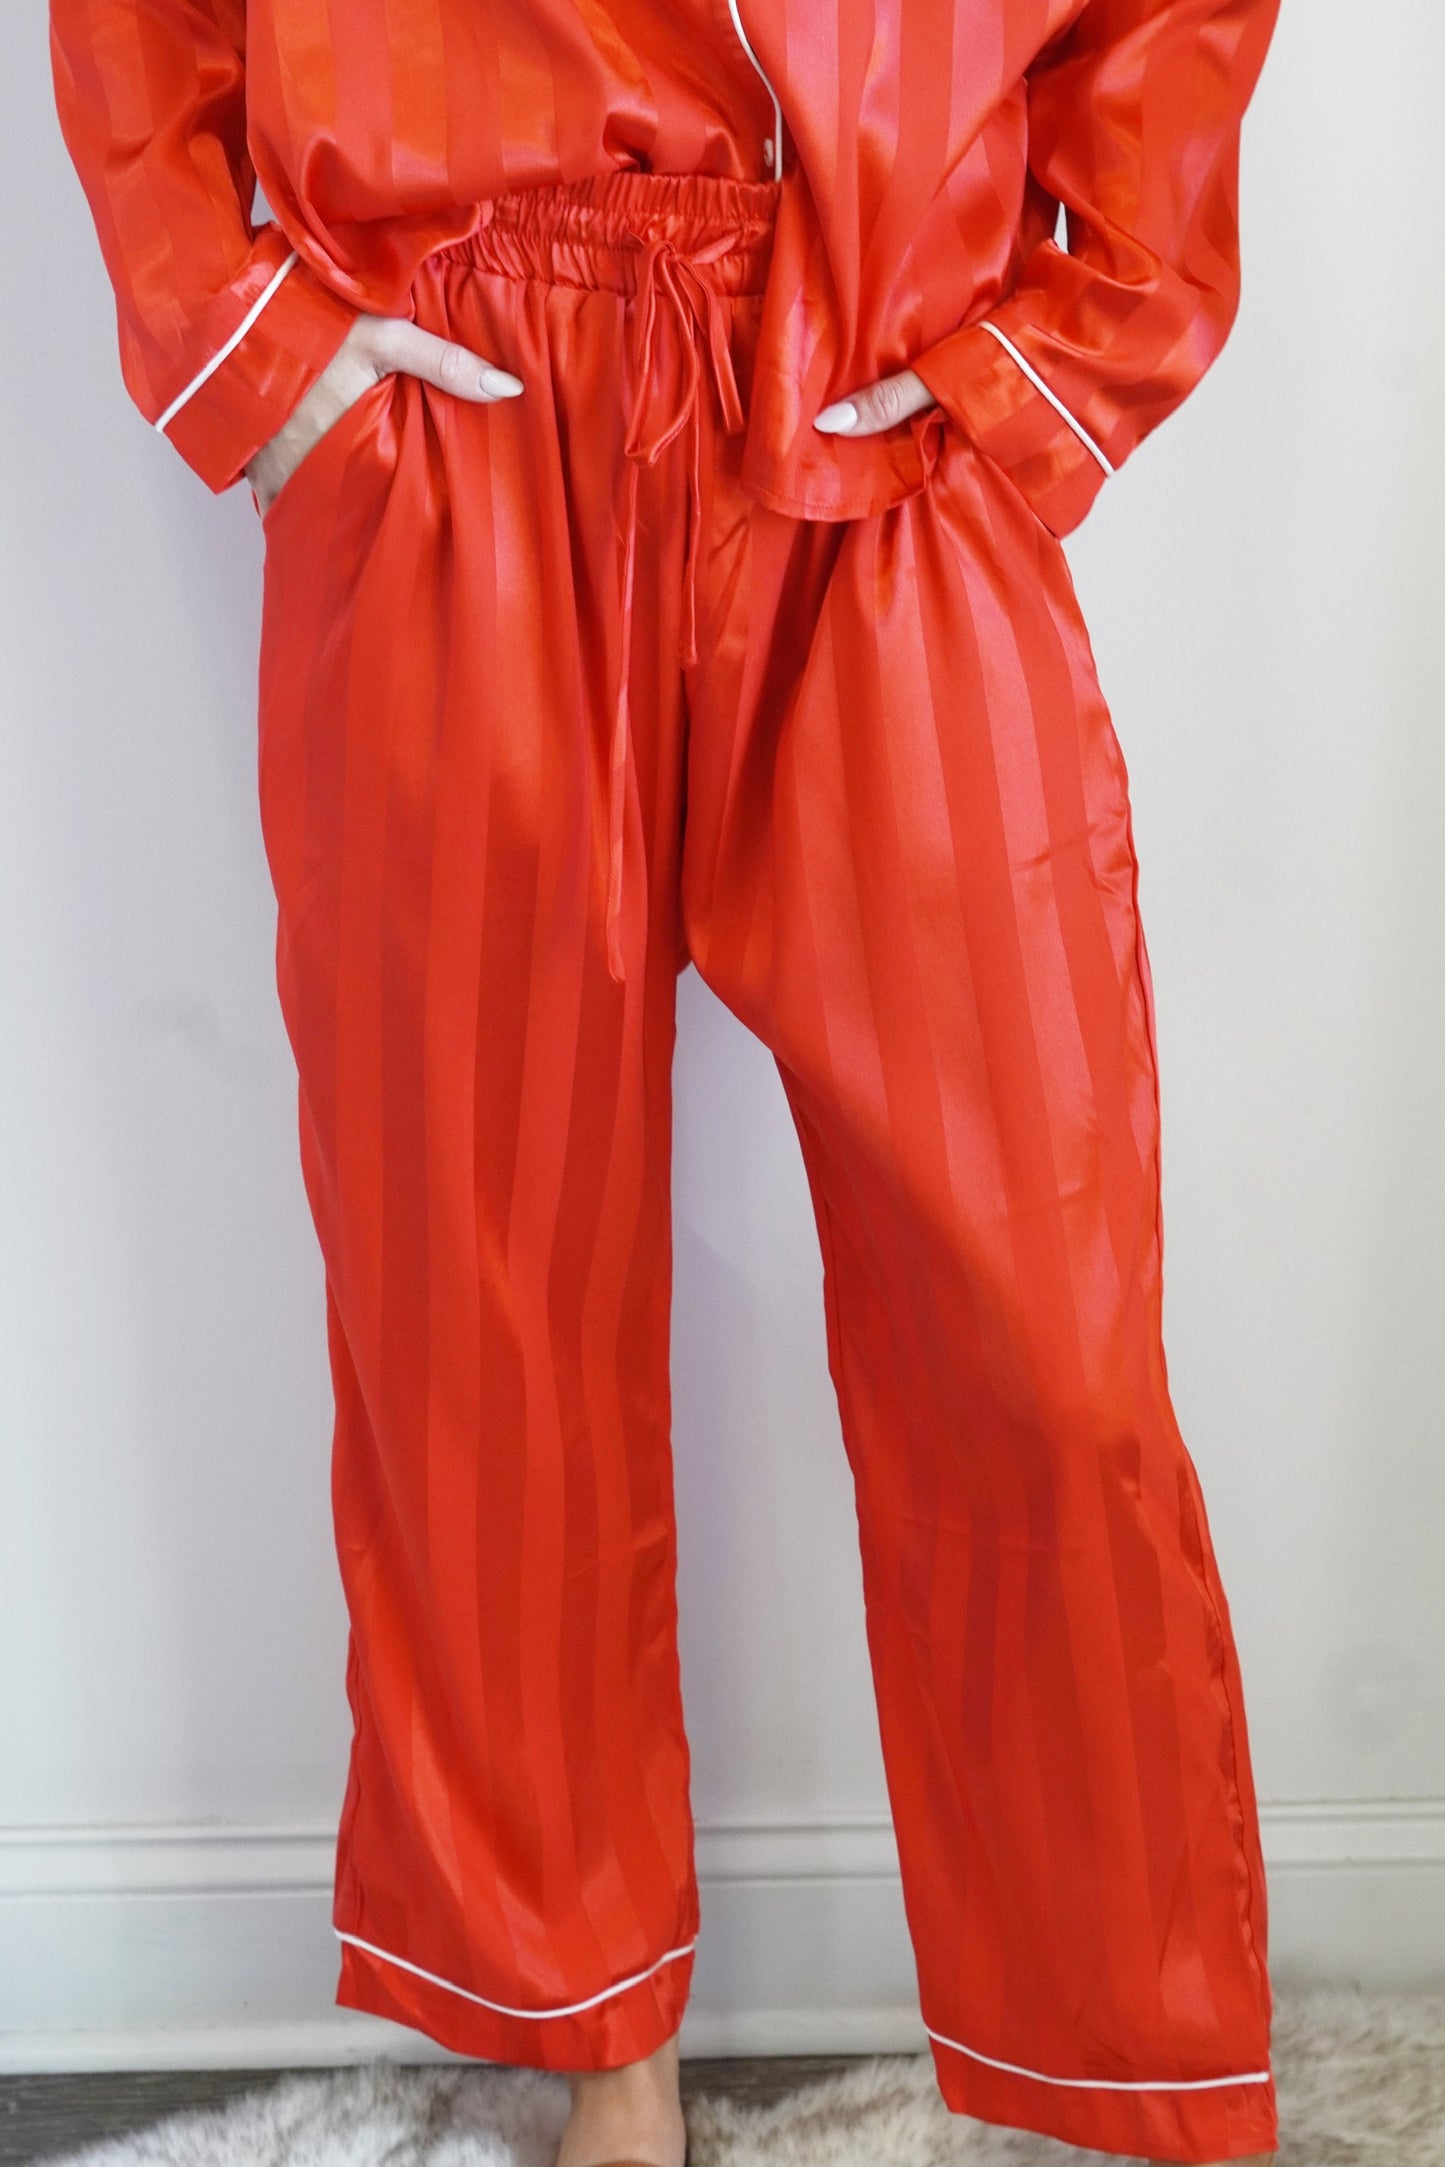 Elastic Waistband w/ Drawstring Two Toned Stripes Colors: Red, White Trim Full Length Pants Relaxed Fit 100% Polyester  